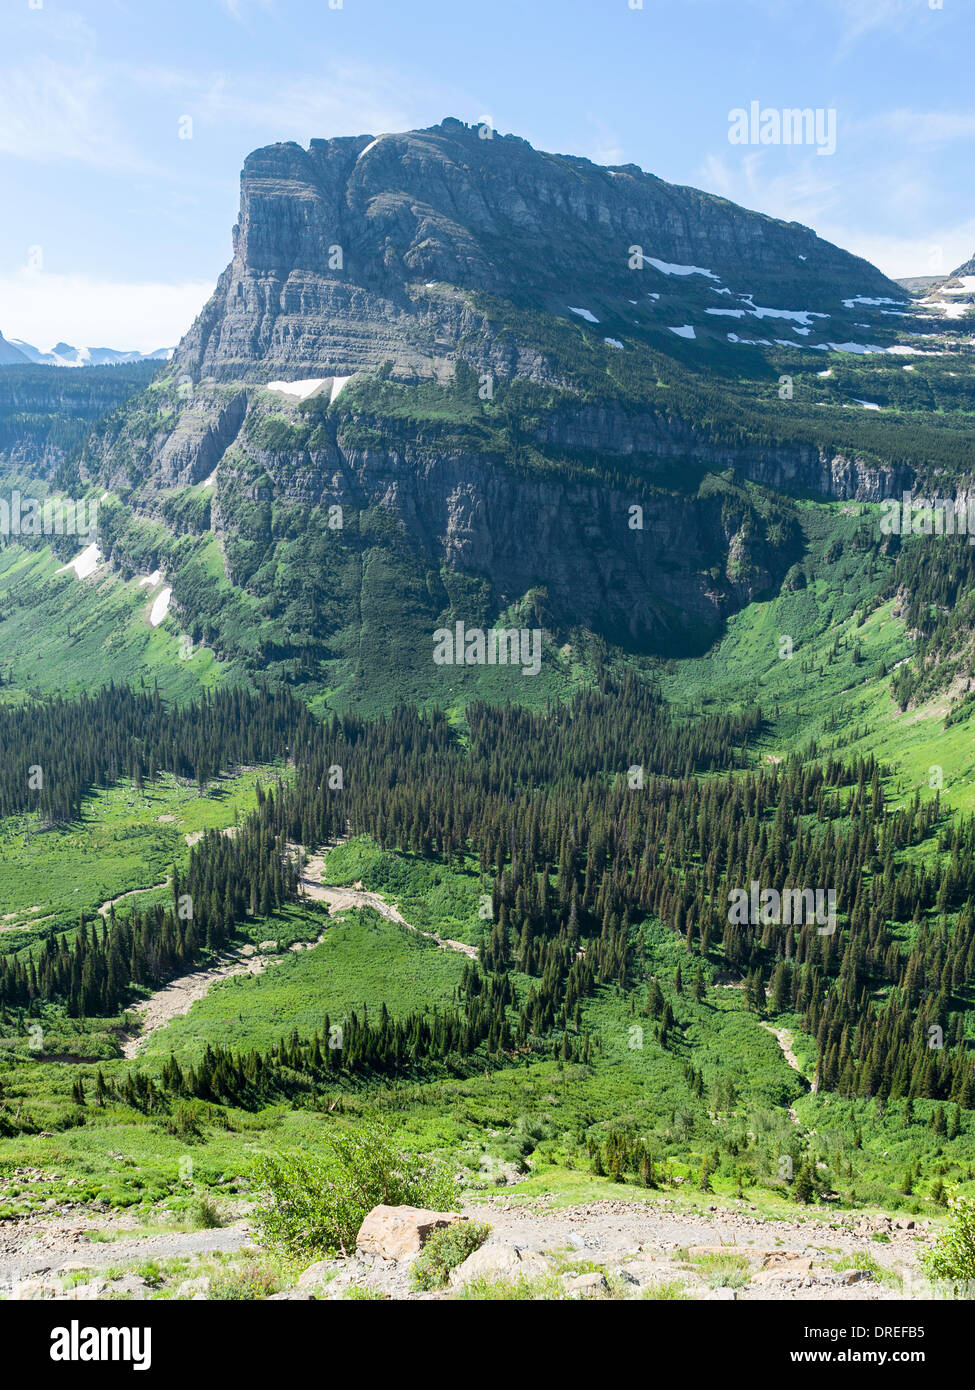 Heavy Runner Mountain, seen from 'Going-to-the-Sun' Road (built 1921-1932), Glacier National Park, Montana, USA. Stock Photo